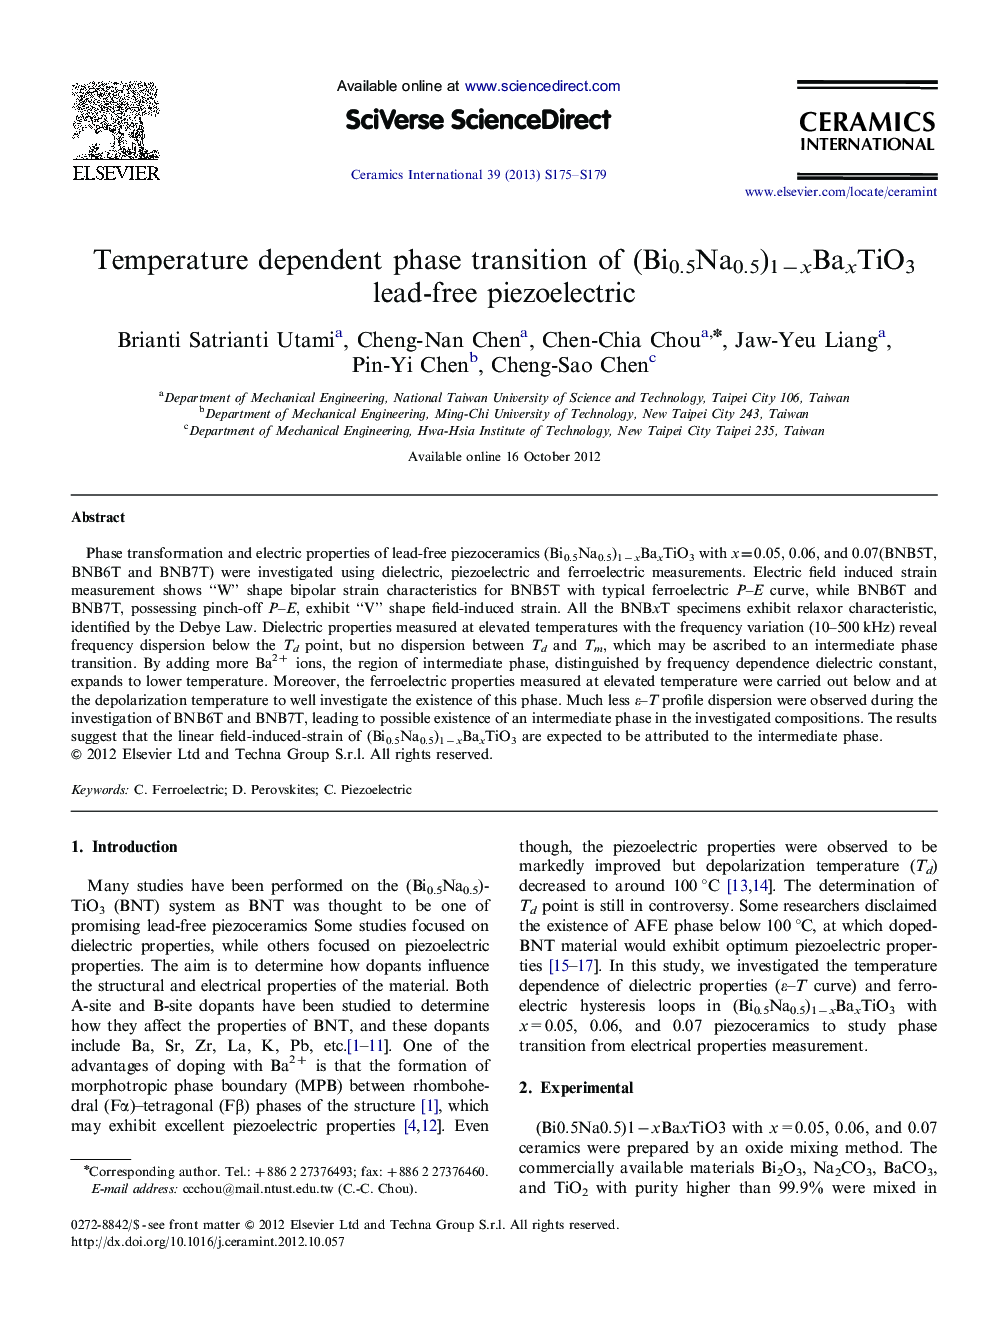 Temperature dependent phase transition of (Bi0.5Na0.5)1−xBaxTiO3 lead-free piezoelectric